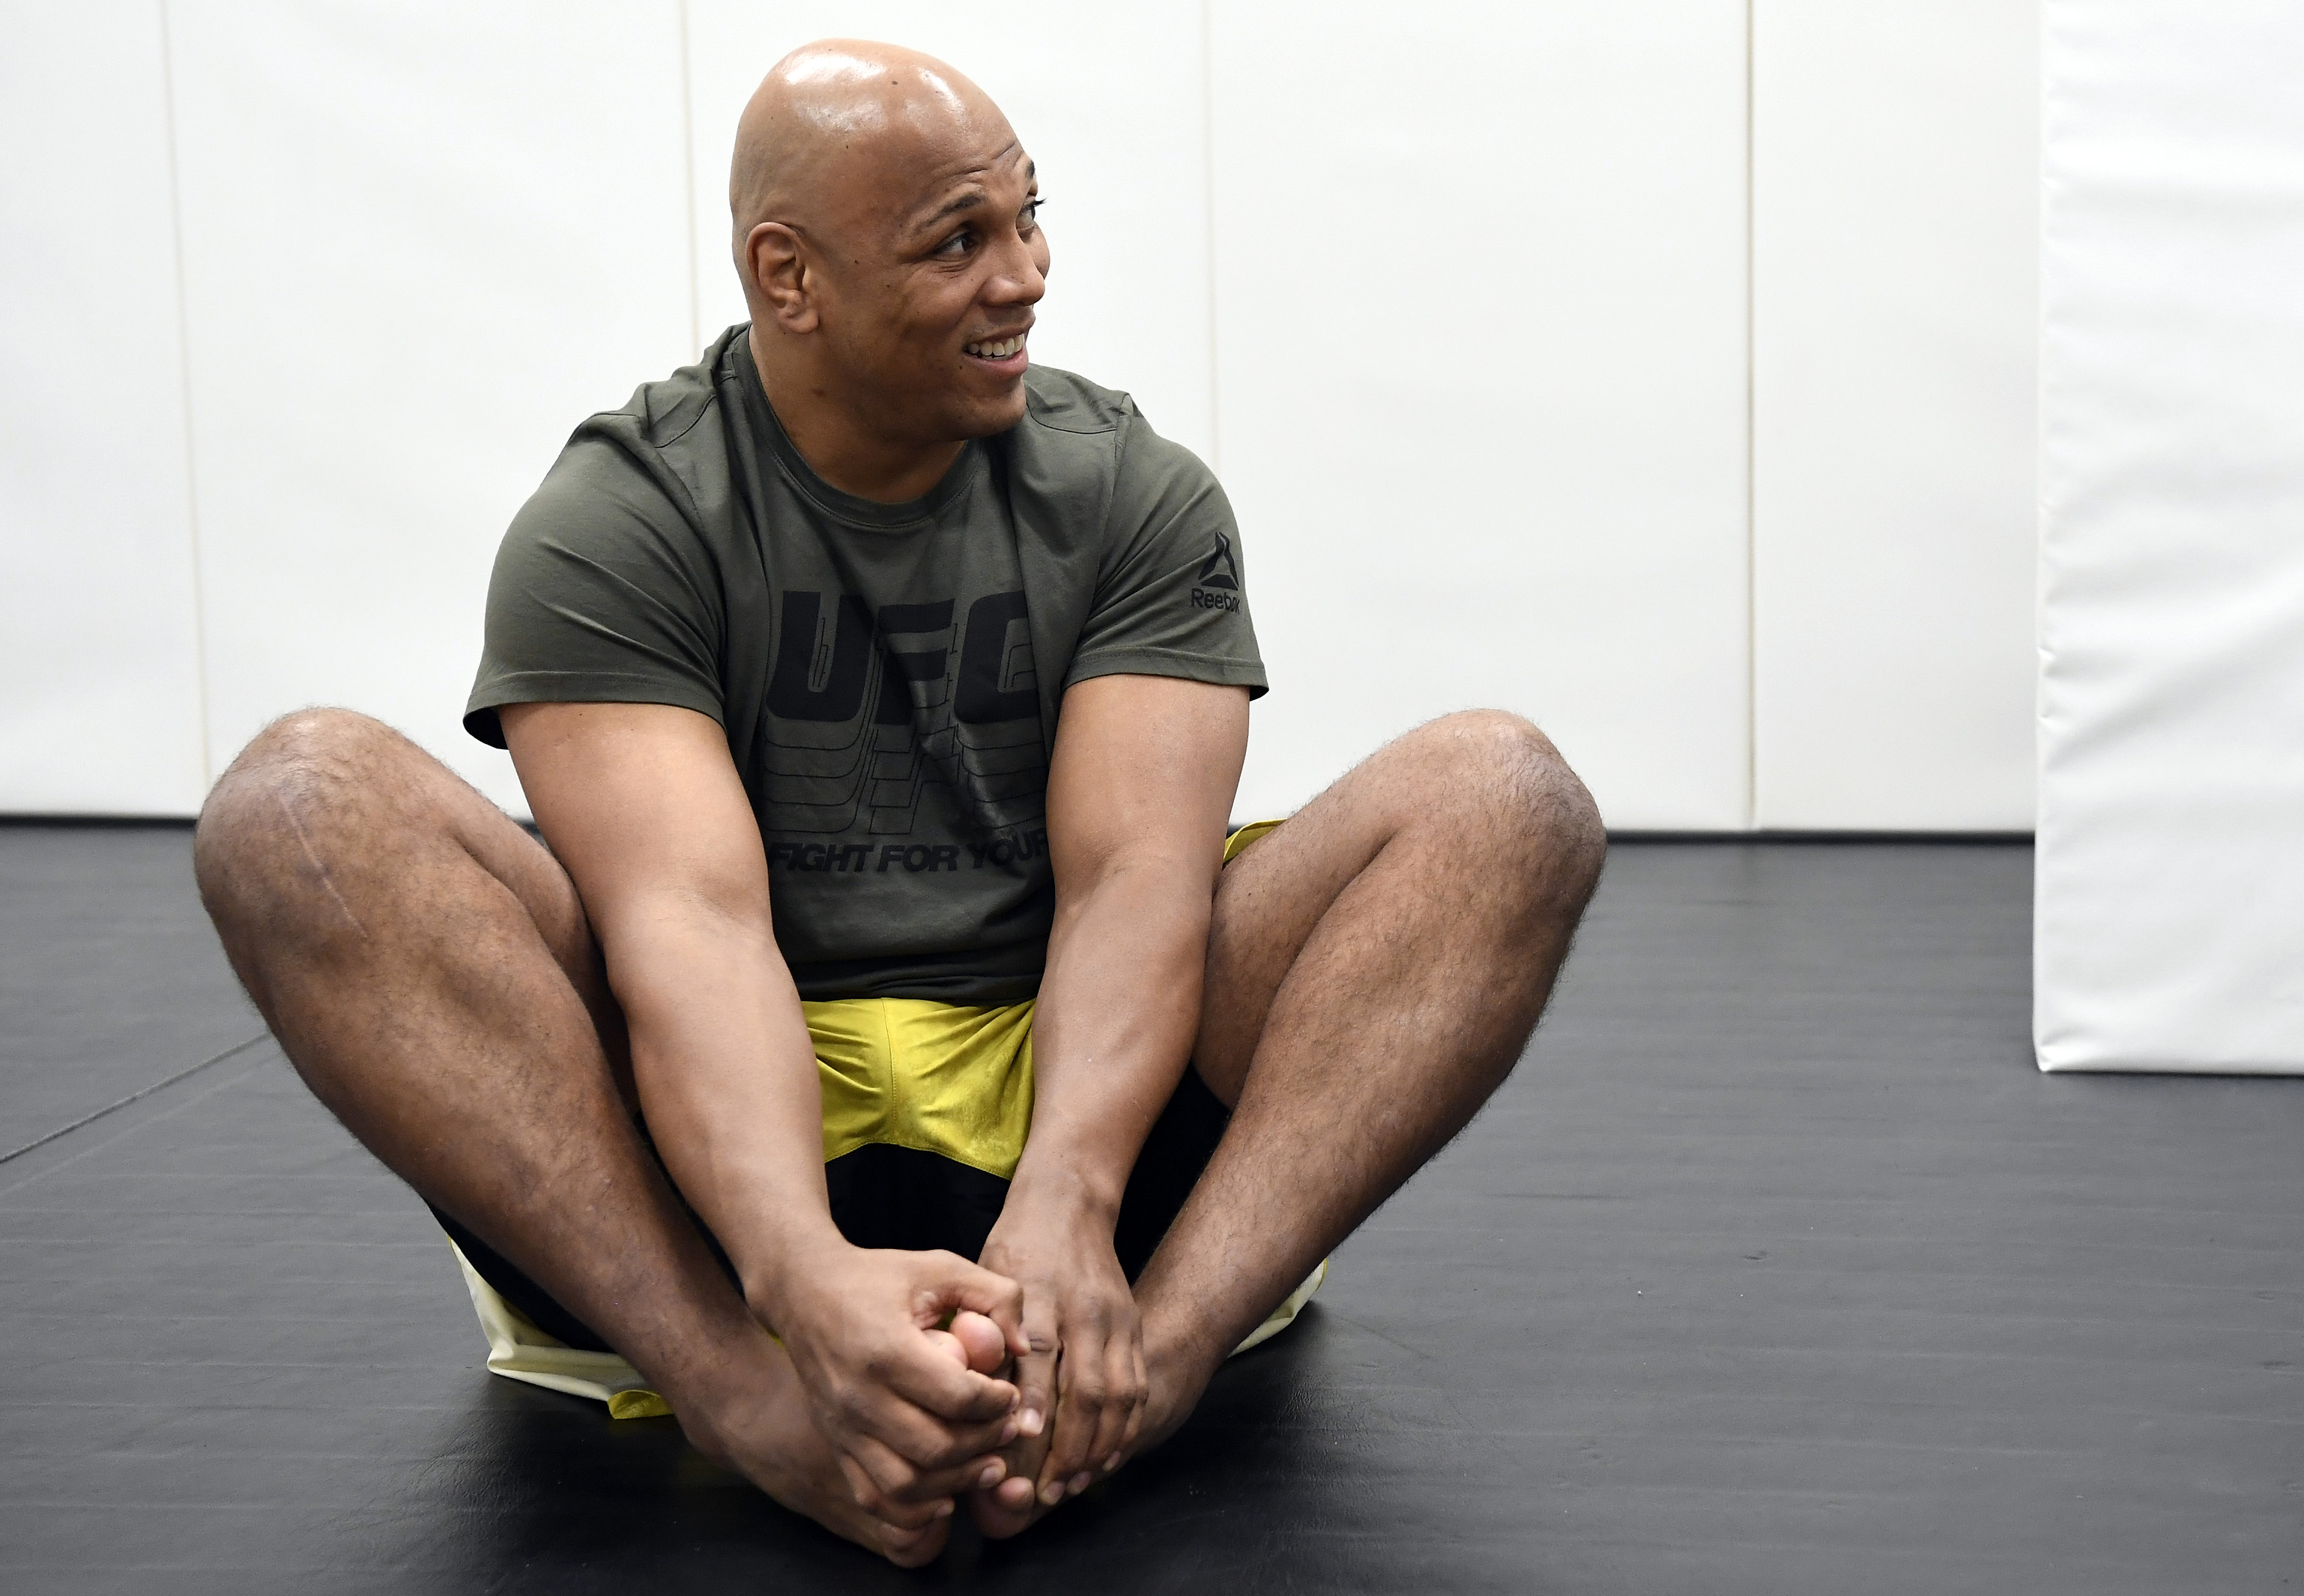 Marcos Rogerio de Lima is set to face Ben Rothwell at UFC Vegas 42